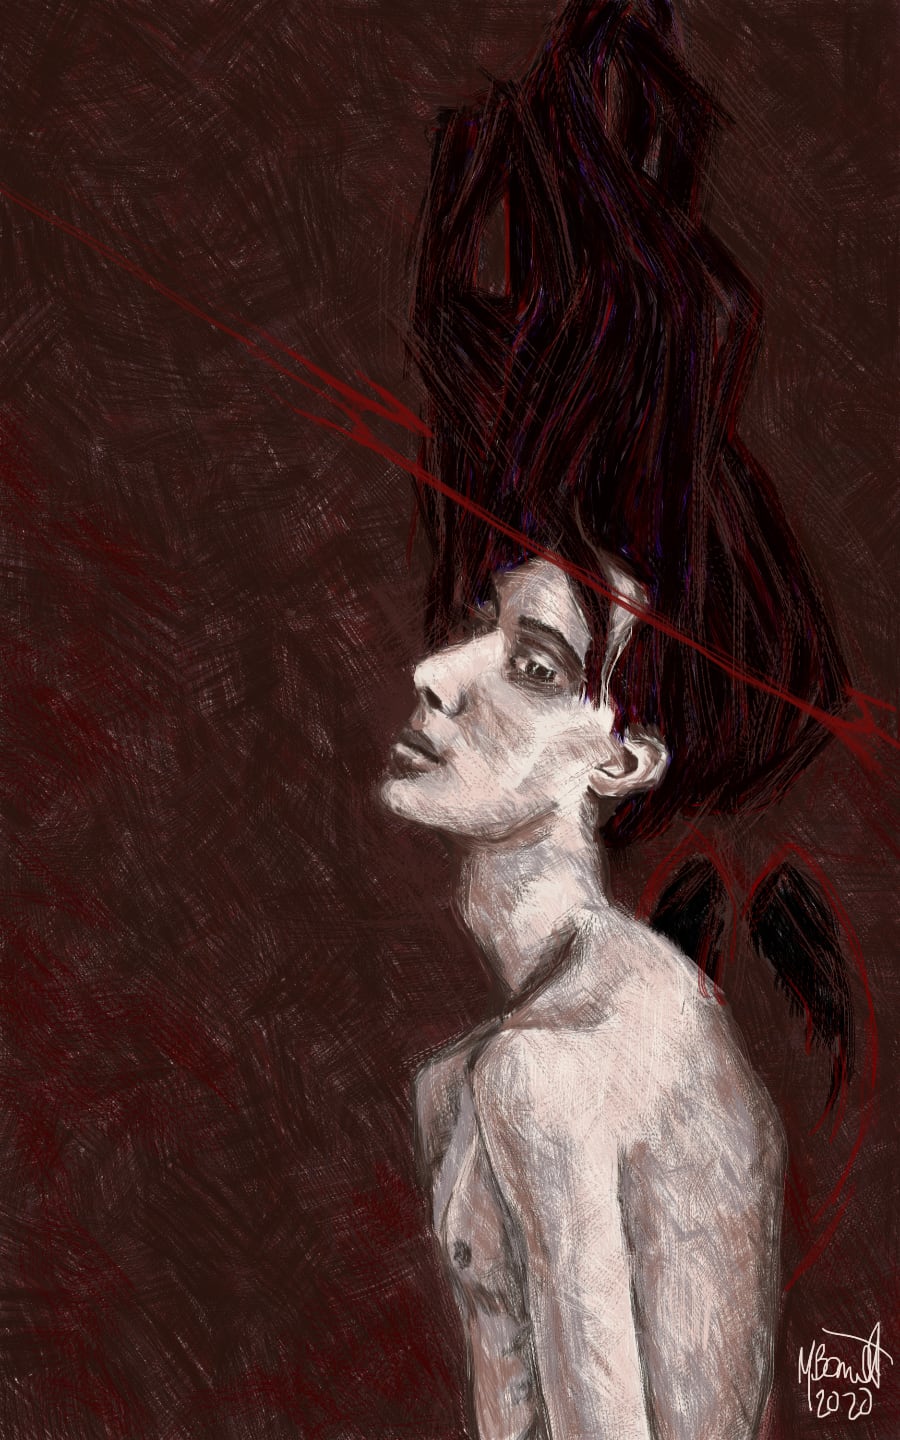 Misery Angel by Melissa Barrett. Against a scratched, choatic, dark red and brown background stands a white-skinned figure, the upper half their naked body visible. The figure is gaunt and looking at us in profile with their left, large, languid grey eye. The figure has long dark hair, with crimson highlights, lifting off their head as if they are falling. There are subtle black wings, outlined in red, as if a parody of angel wings, behind the figure, but not attached to them. There is a red streak of a distored halo around the figure's head. It is signed in white with "MBarrett 2020."